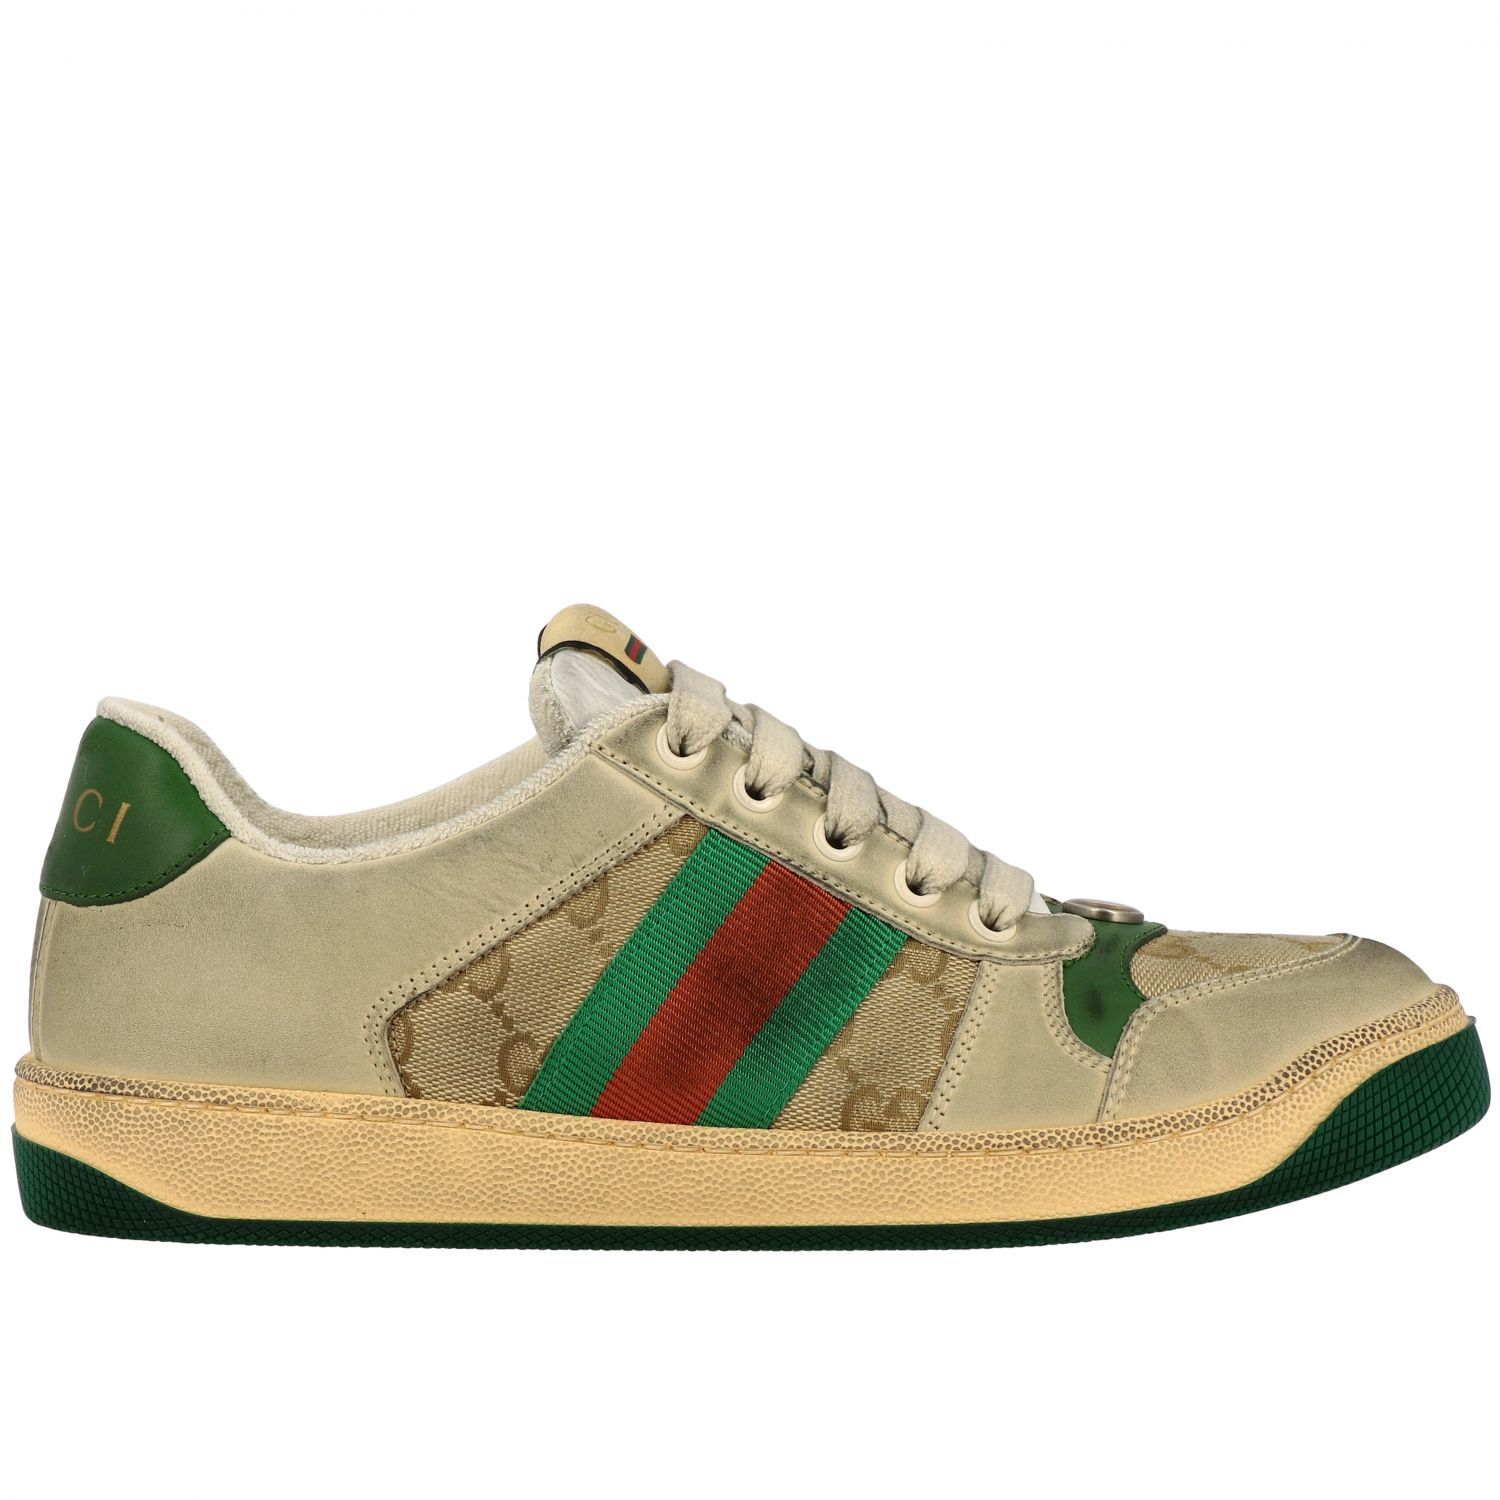 GUCCI: Screener sneakers in GG Supreme canvas and leather with web